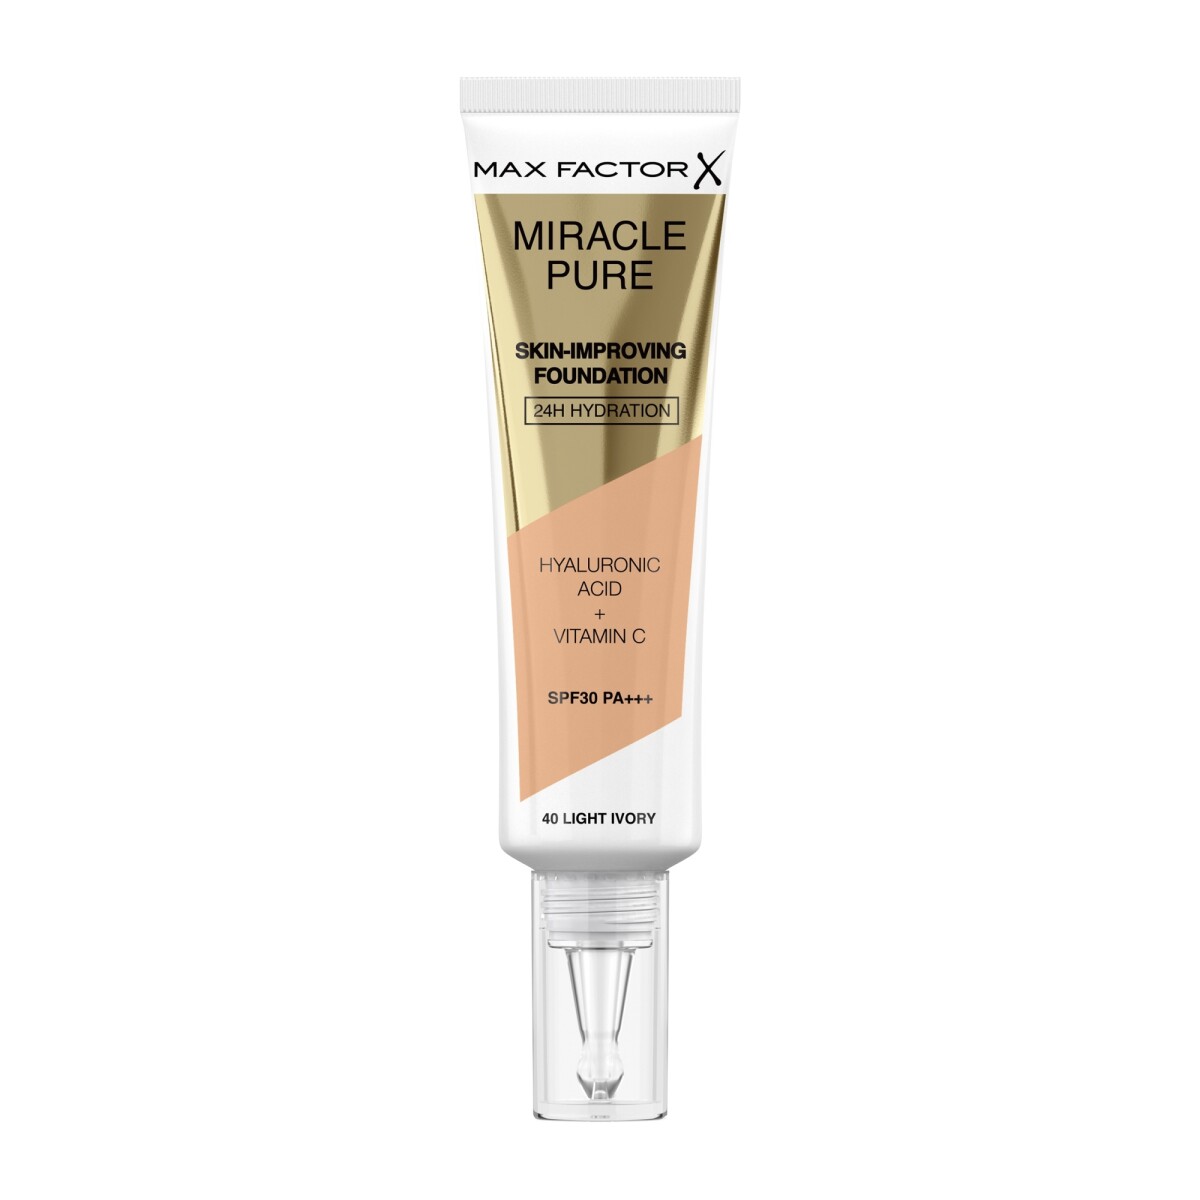 Max Factor Miracle Pure Foundation Light Ivory #40 